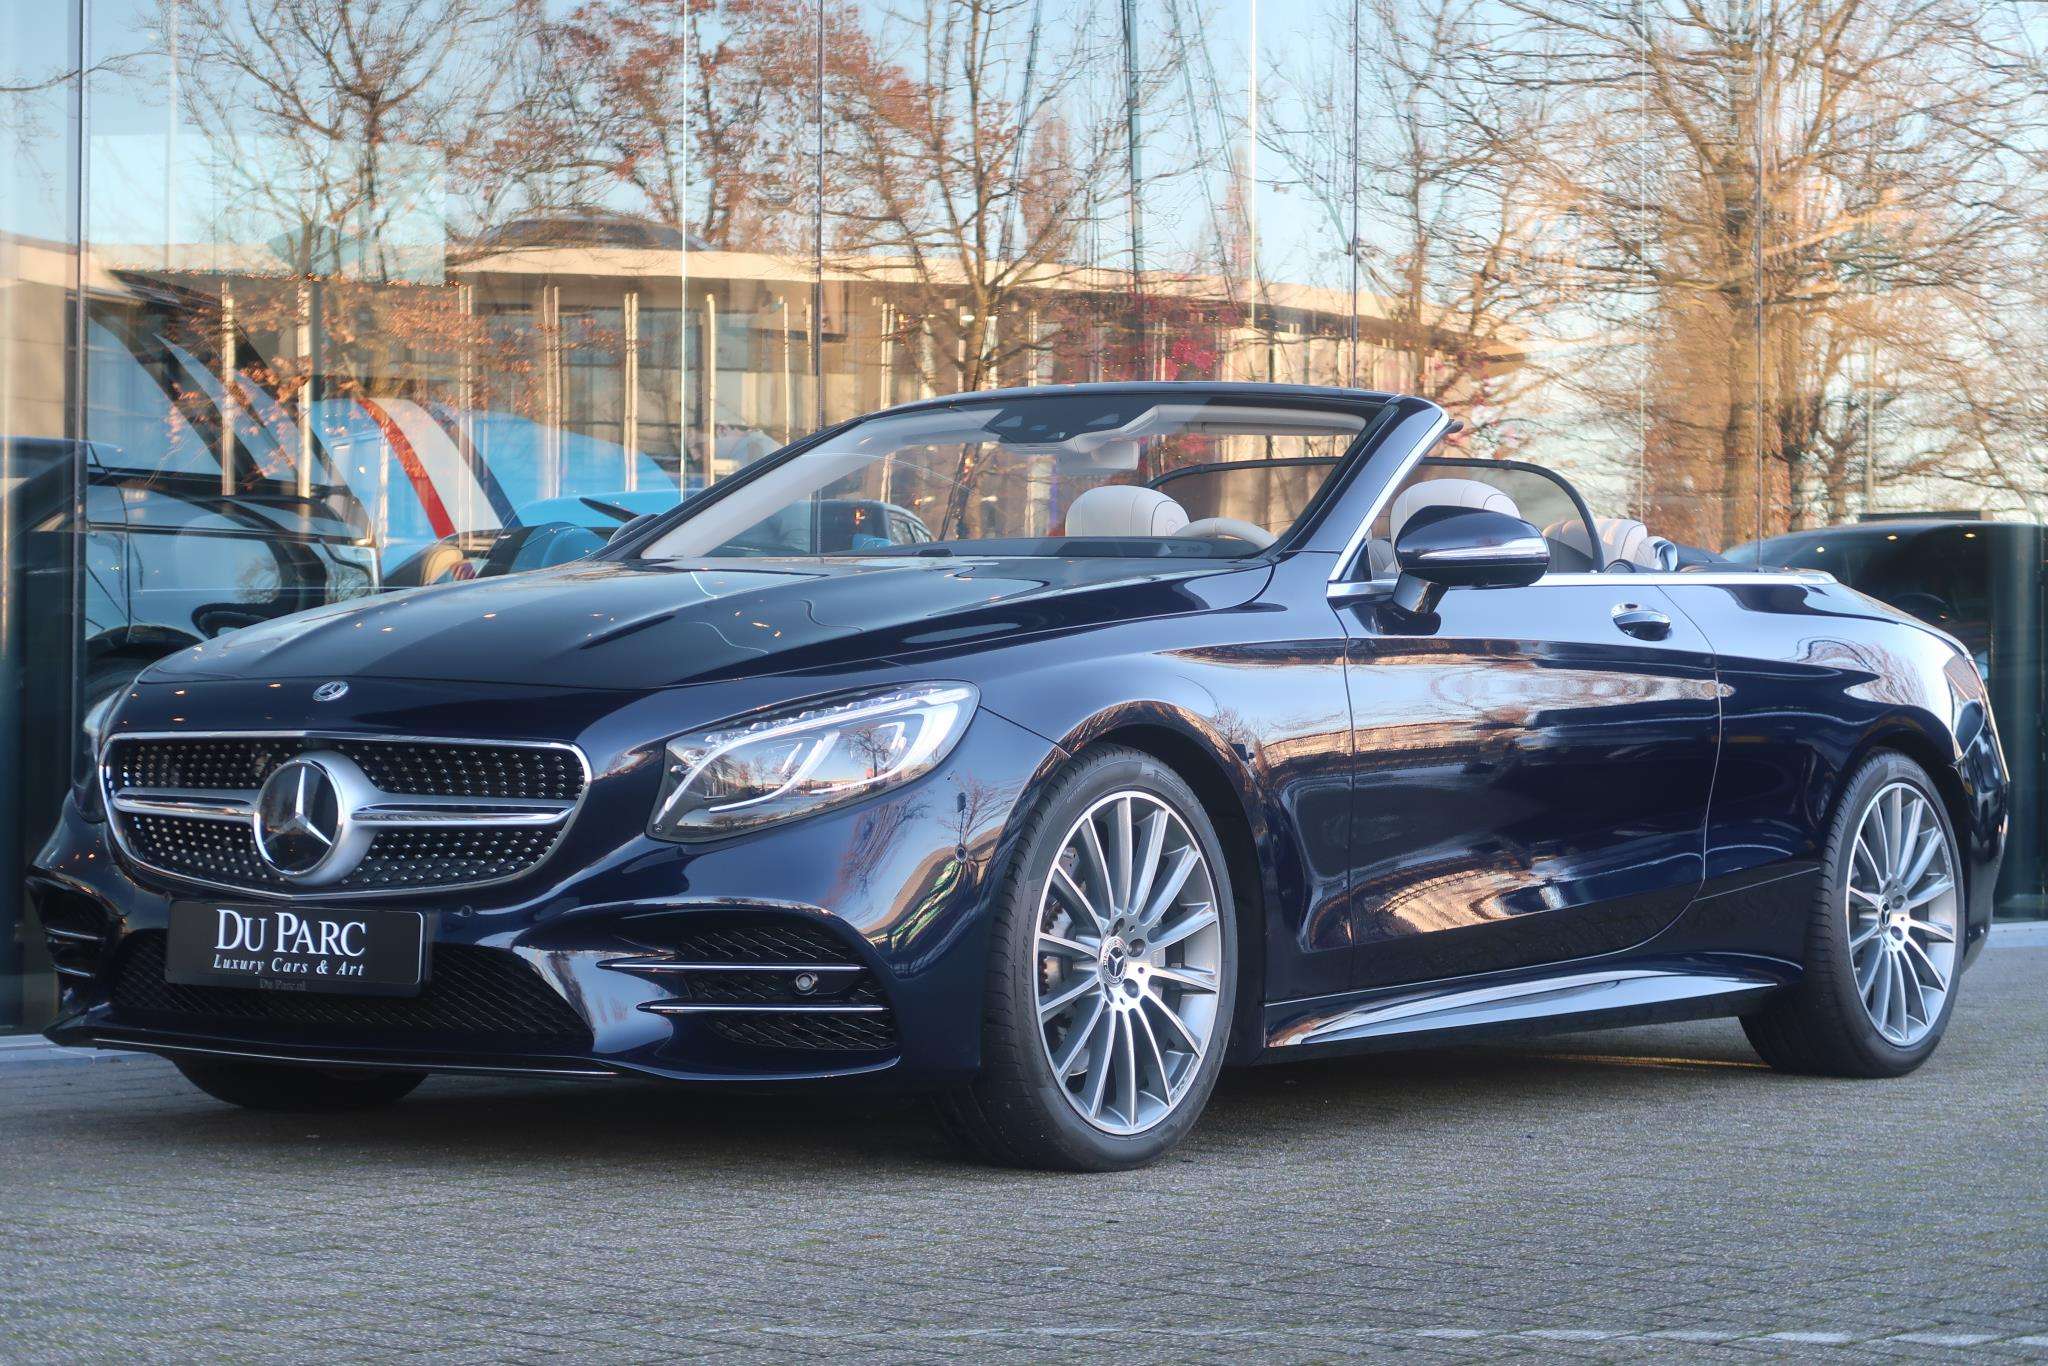 Mercedes-Benz S 560 Convertible in Blue used in OISTERWIJK for € 179,888.-